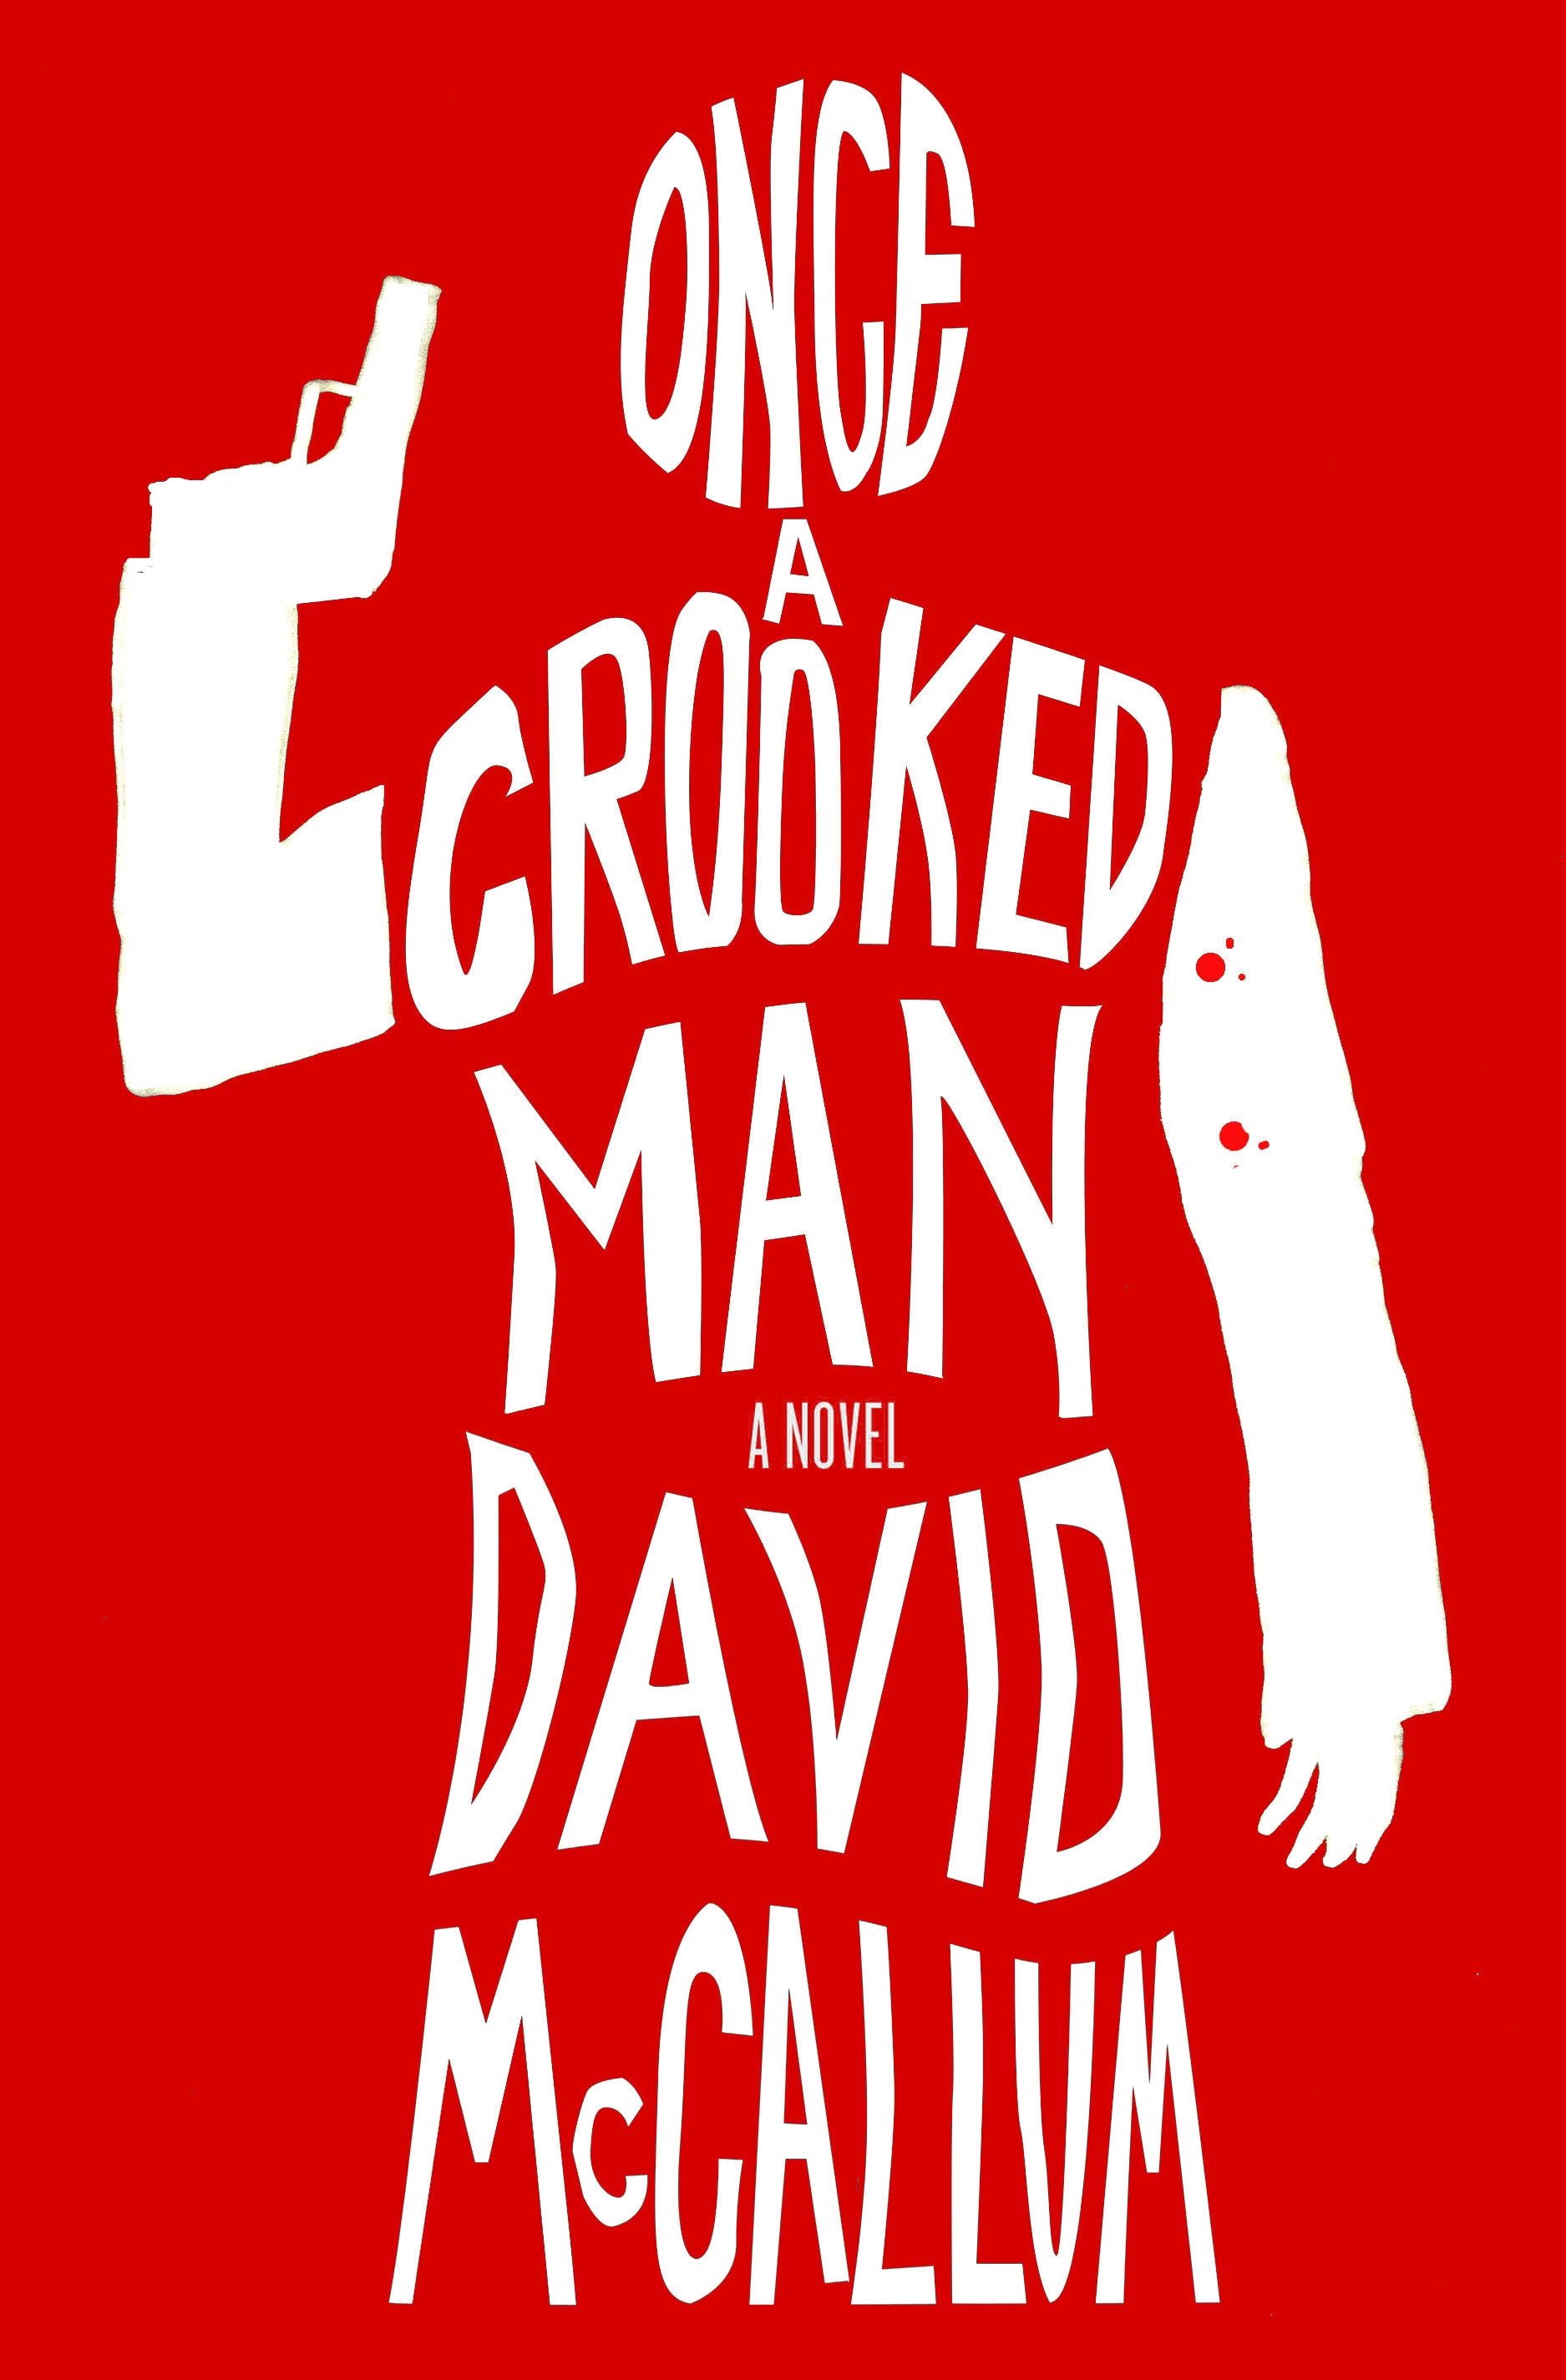 &quot;Once a Crooked Man,&quot; a novel by David McCallum.